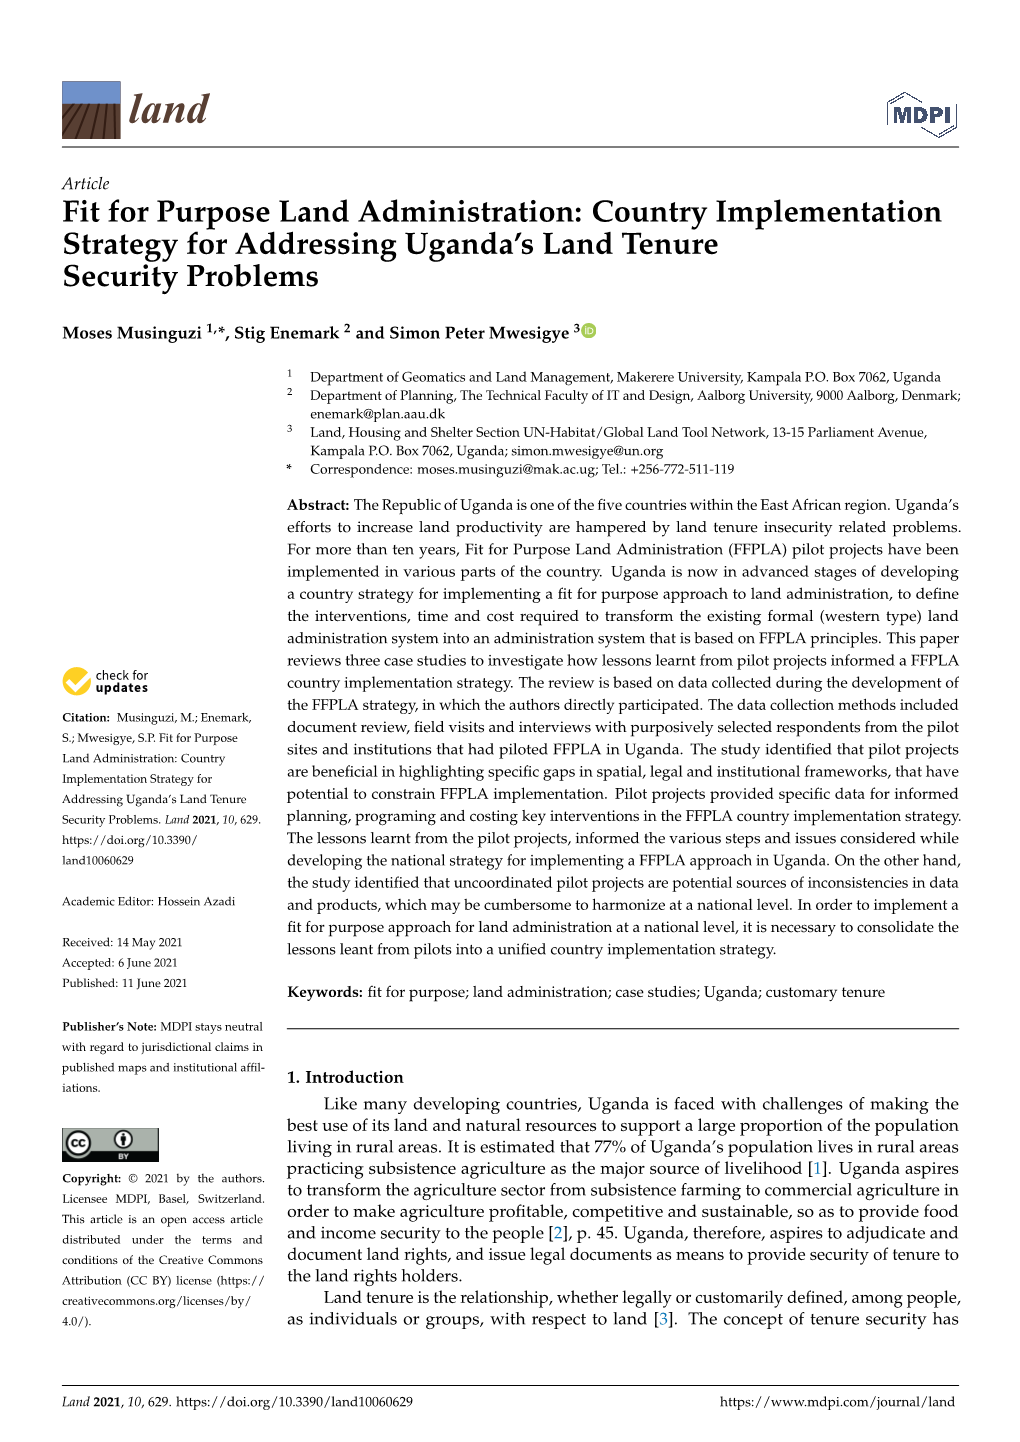 Fit for Purpose Land Administration: Country Implementation Strategy for Addressing Uganda’S Land Tenure Security Problems